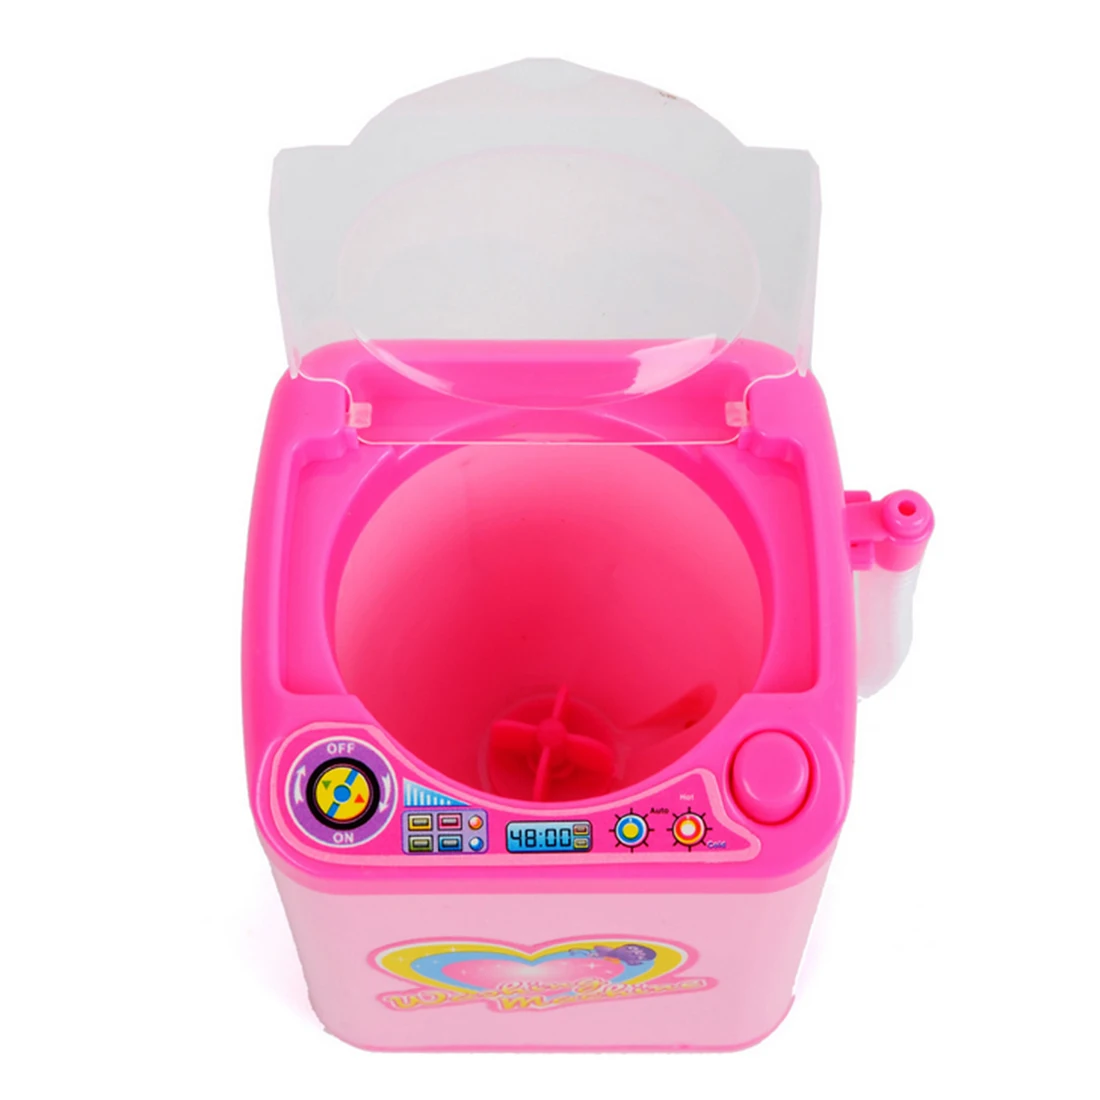 Cute Mini Wash Washing Machine Dollhouse Play House Miniature Toy Doll Food Kitchen Living Room Accessories